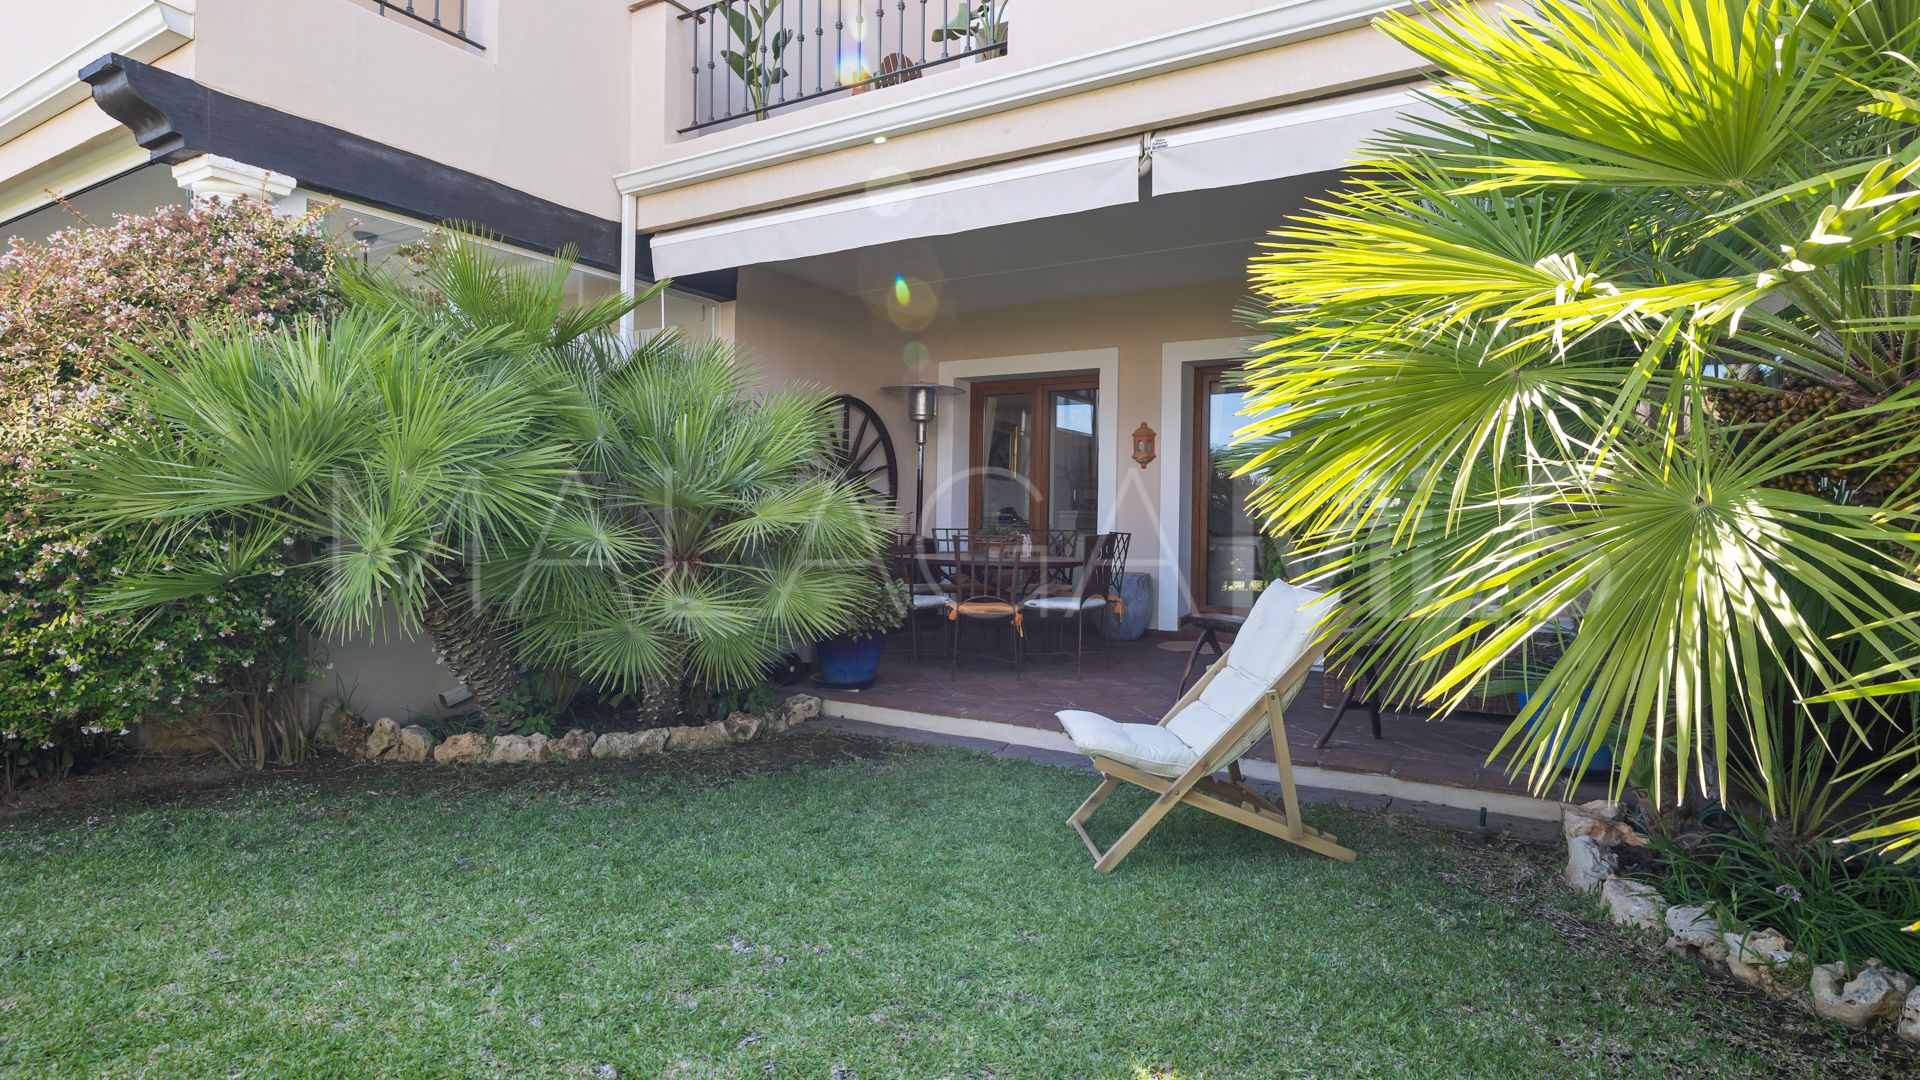 Adosado for sale with 4 bedrooms in Paraiso Hills